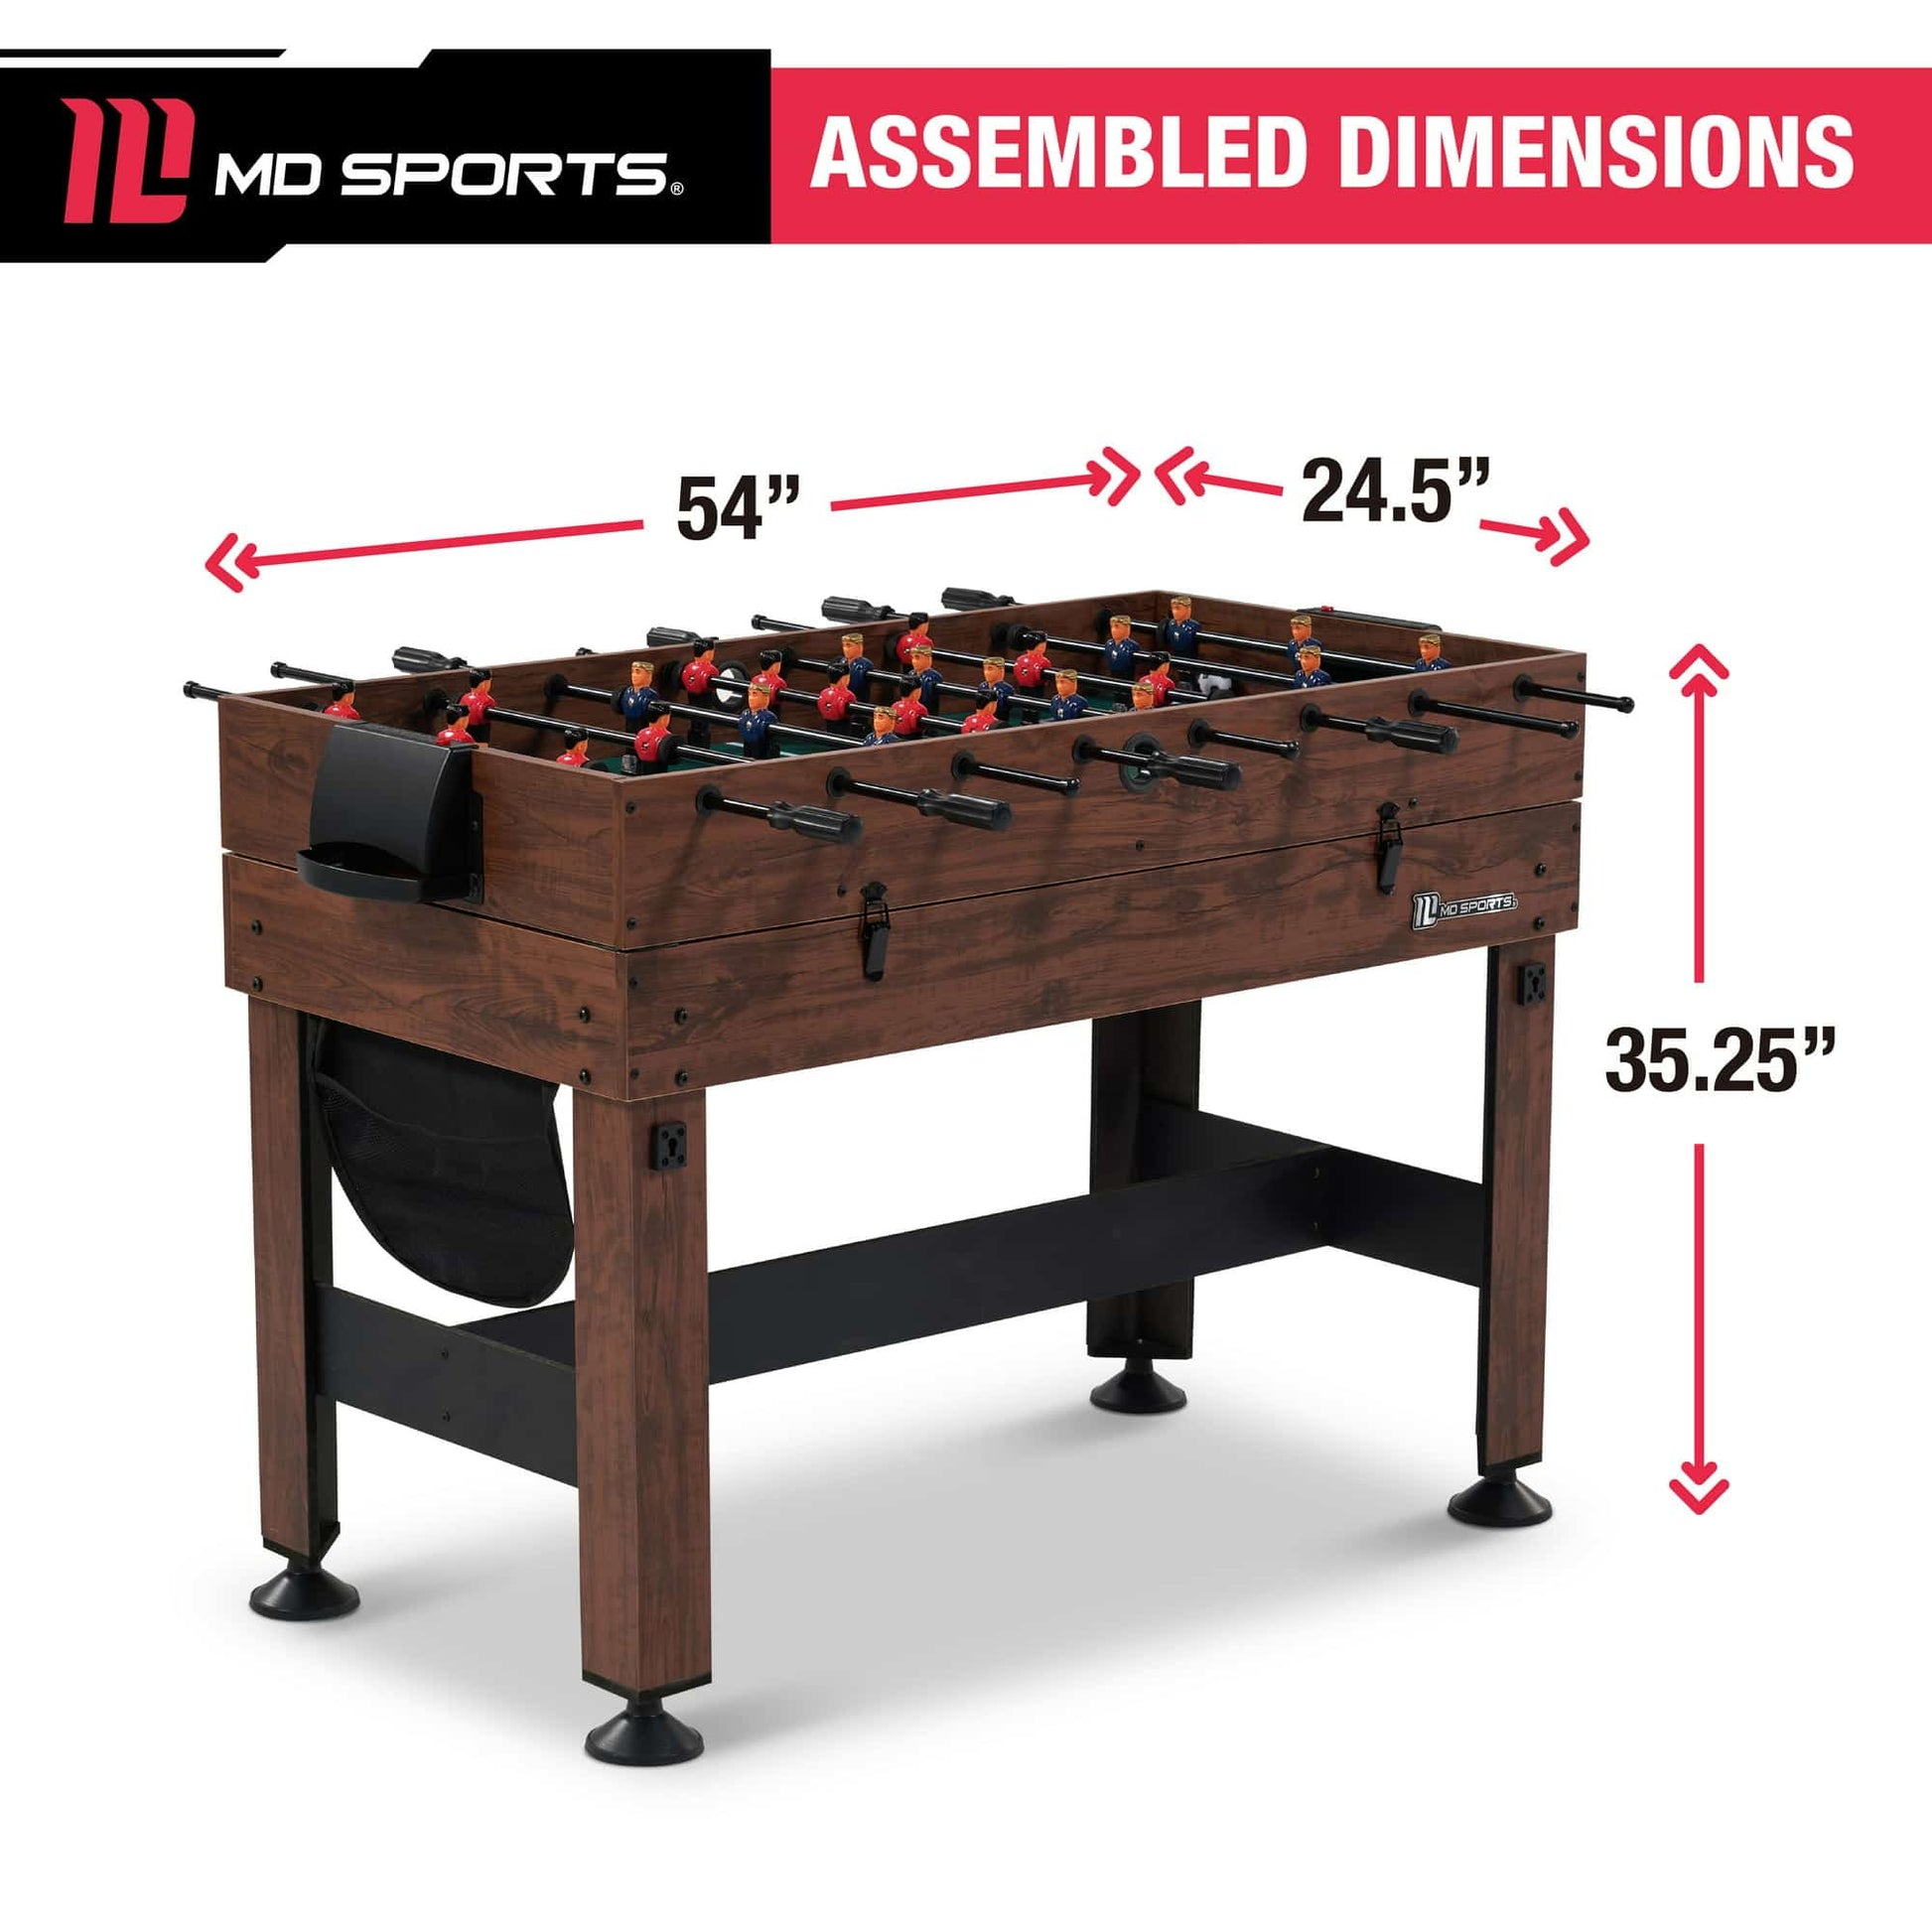 MD Sports 54" 4-in-1 Combo Game Table, Foosball Layout 